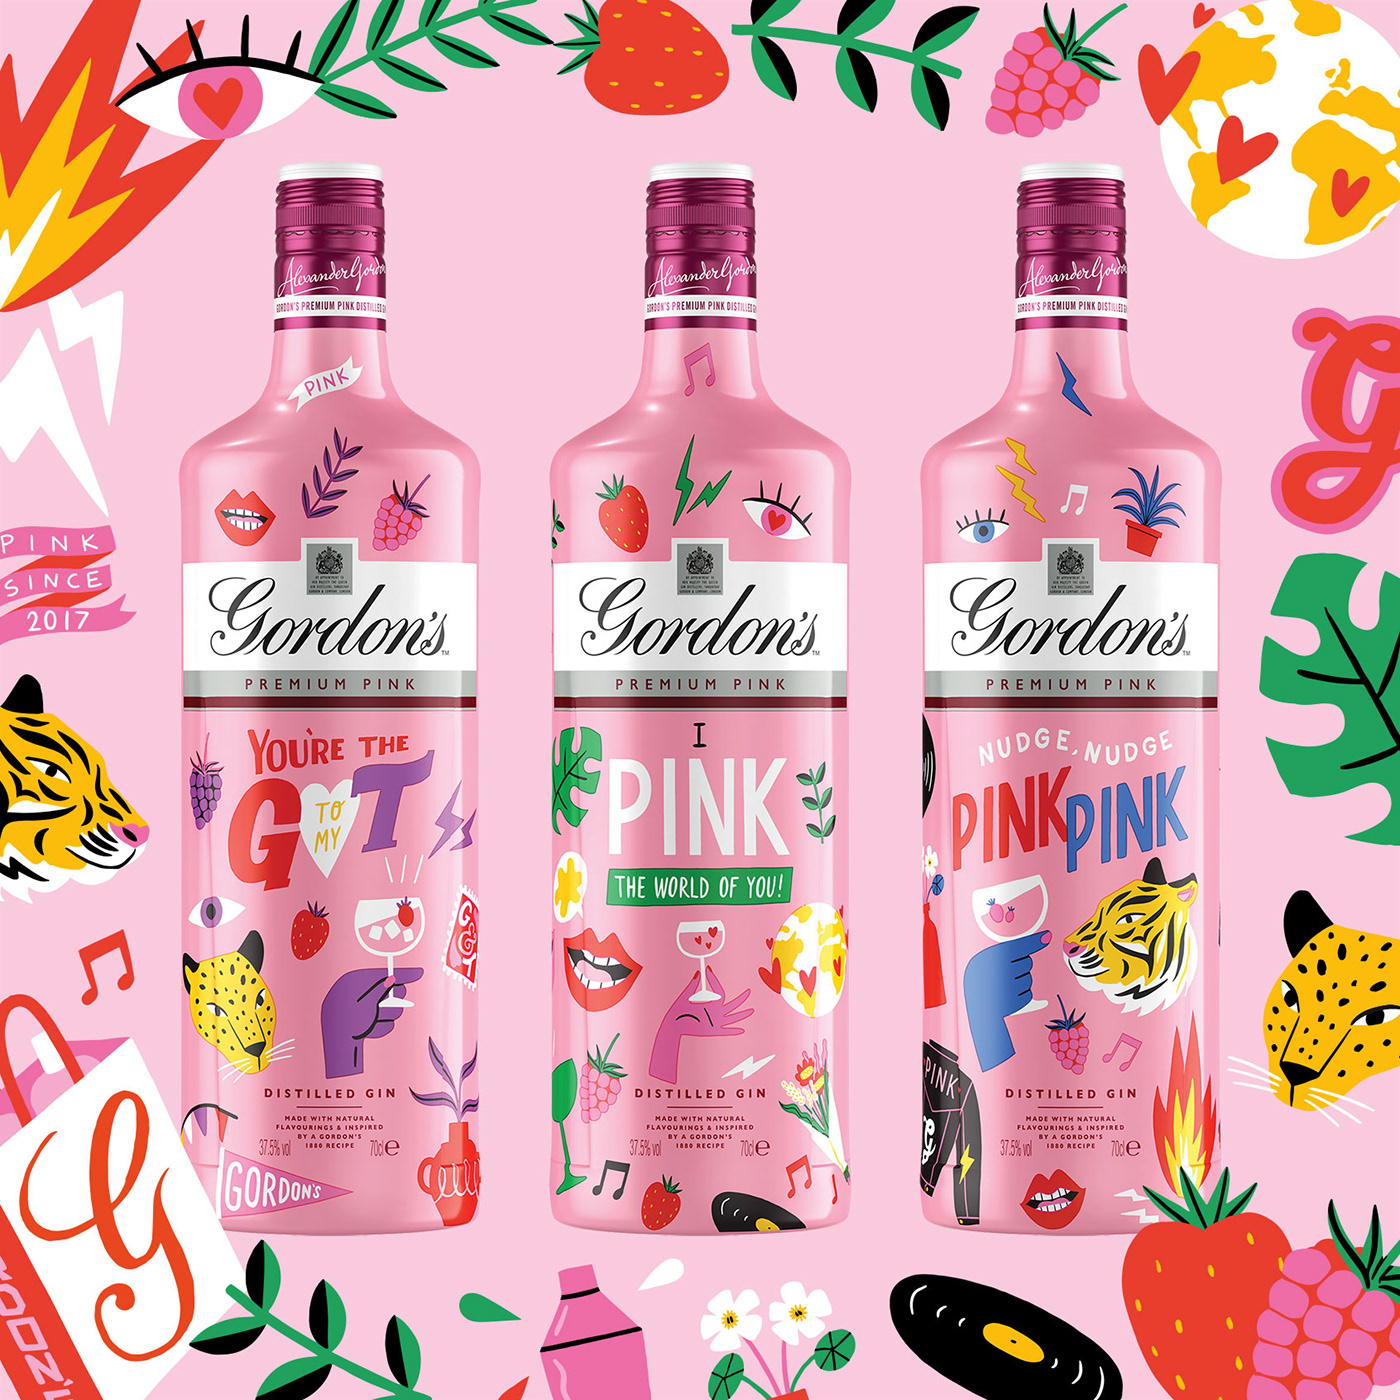 3 bottles of pink gin decorated with bright, modern illustrations